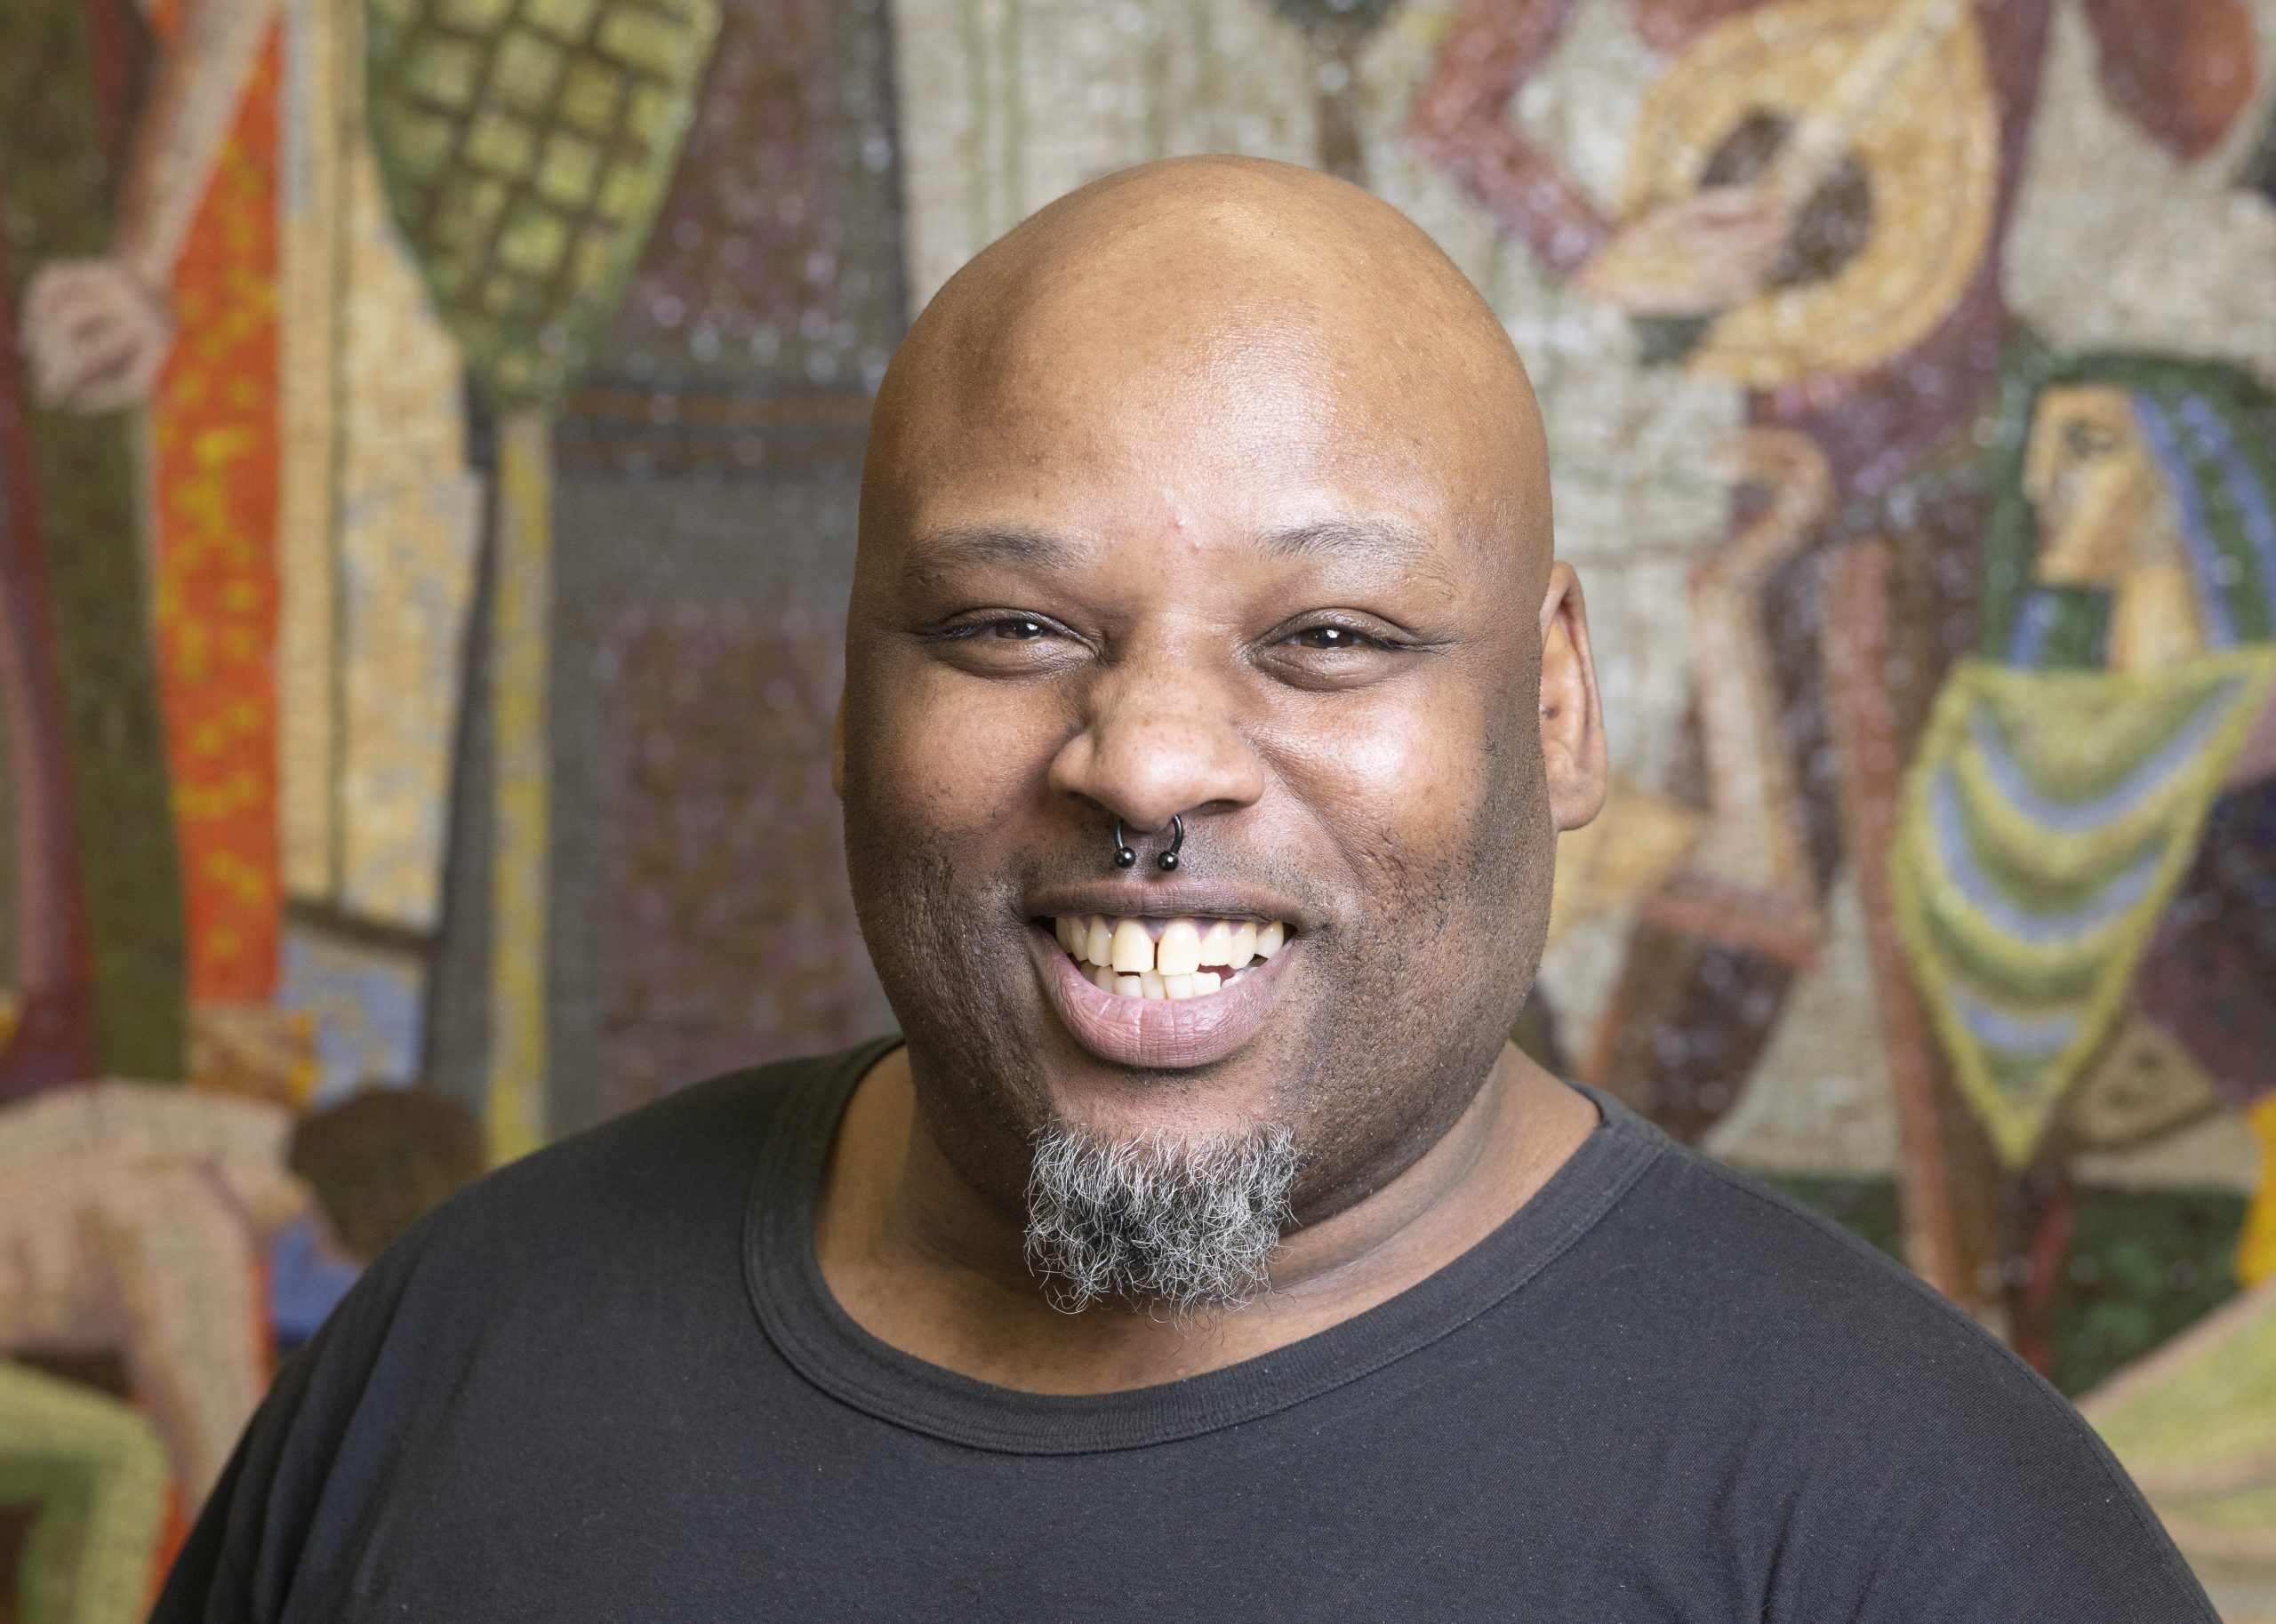 Korey Smith, a Black man with bald head and trimmed beard, smiles for a portrait in the Community Consultation Center community room